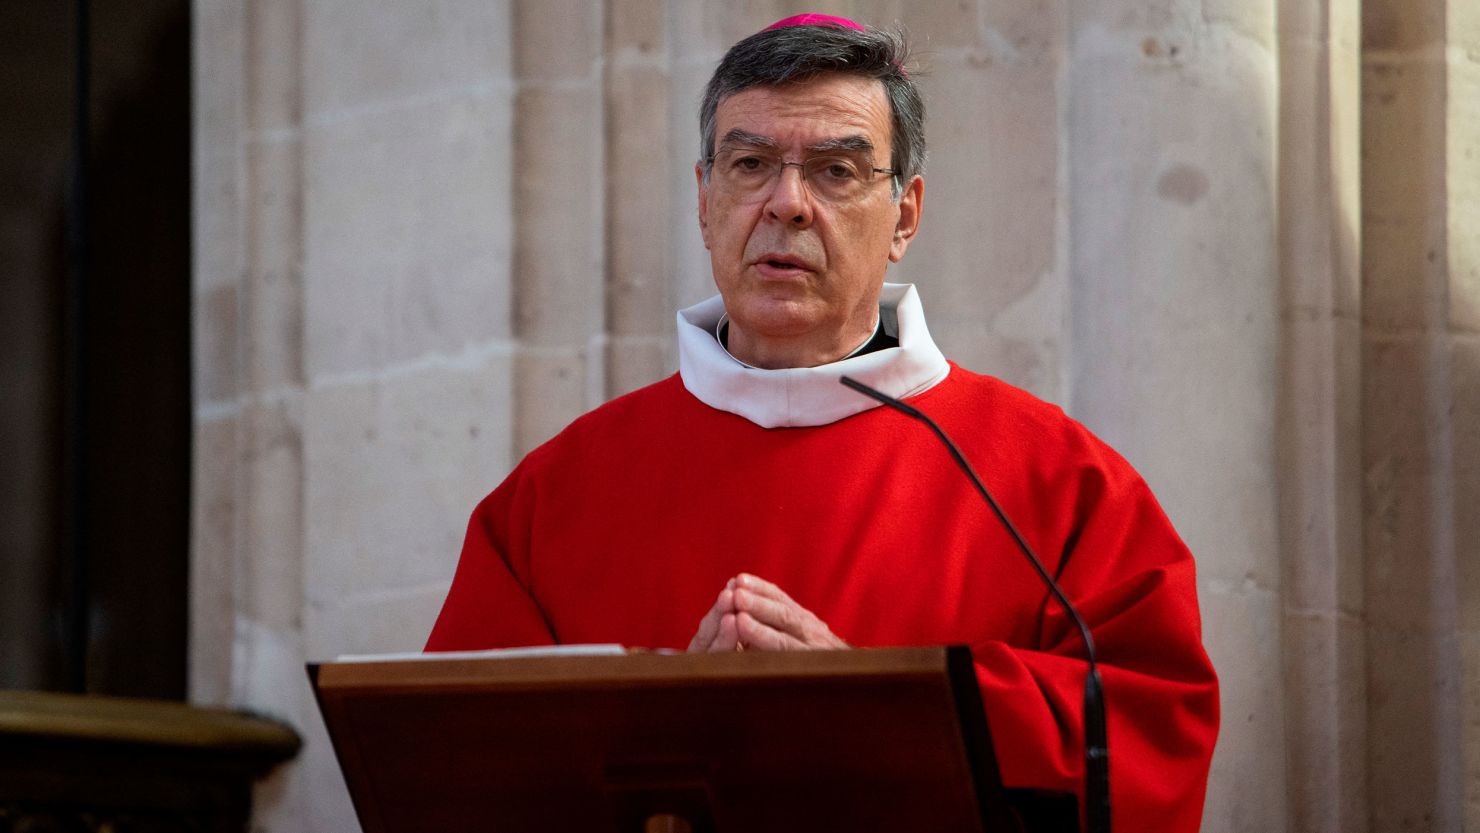 Archbishop of Paris Michel Aupetit, pictured in April, said he asks "forgiveness of those whom I might have hurt."